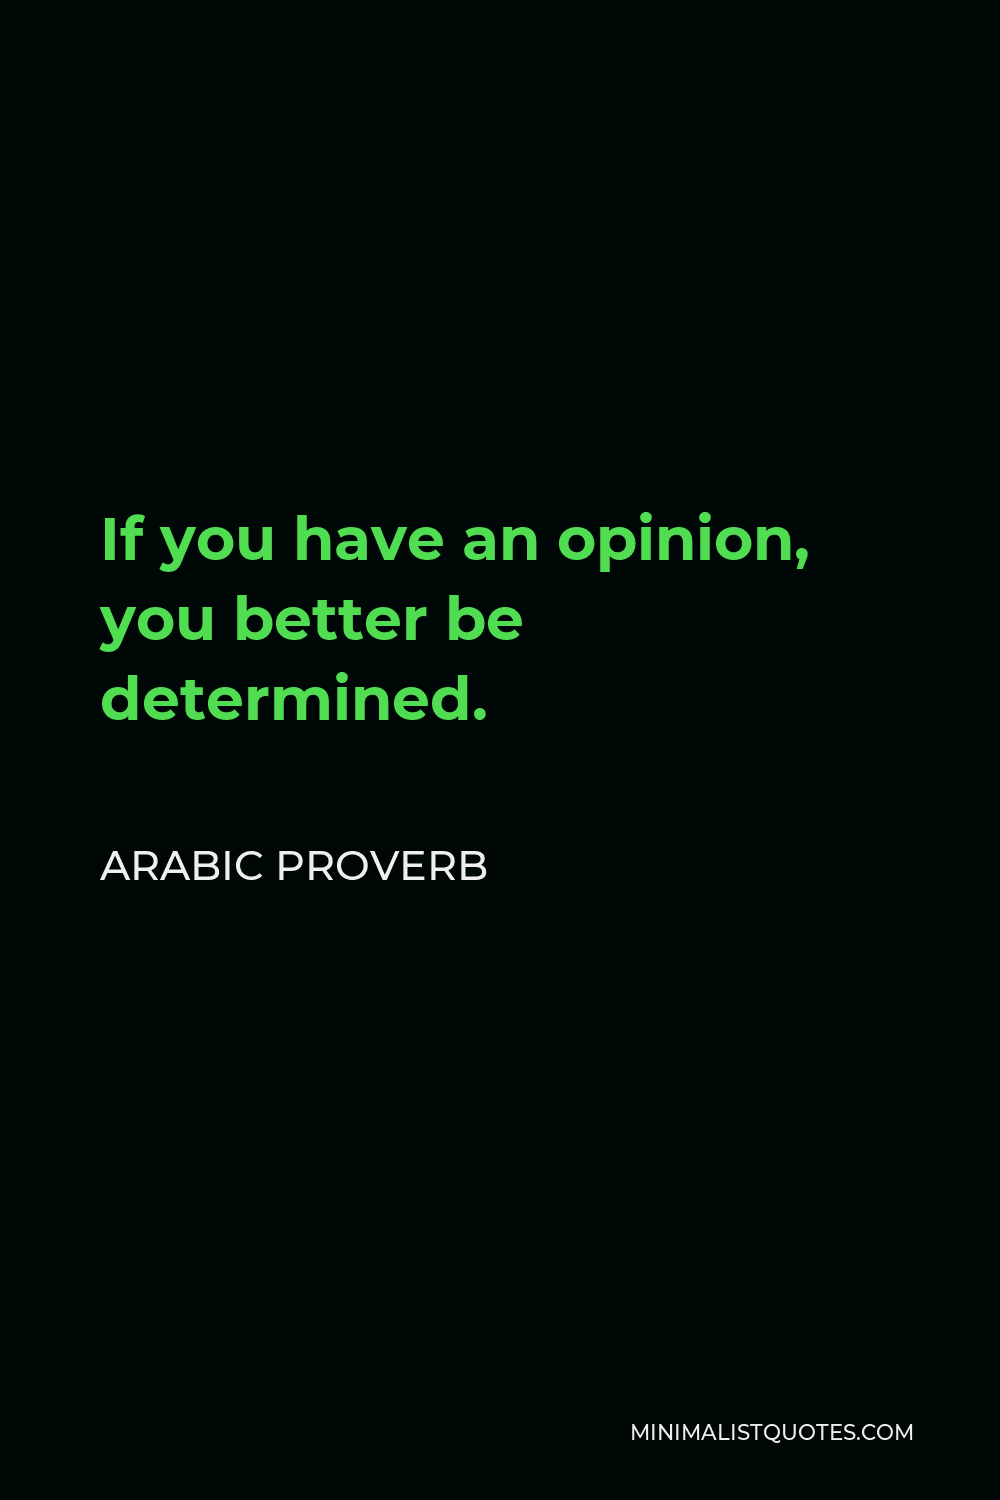 Arabic Proverb Quote - If you have an opinion, you better be determined.